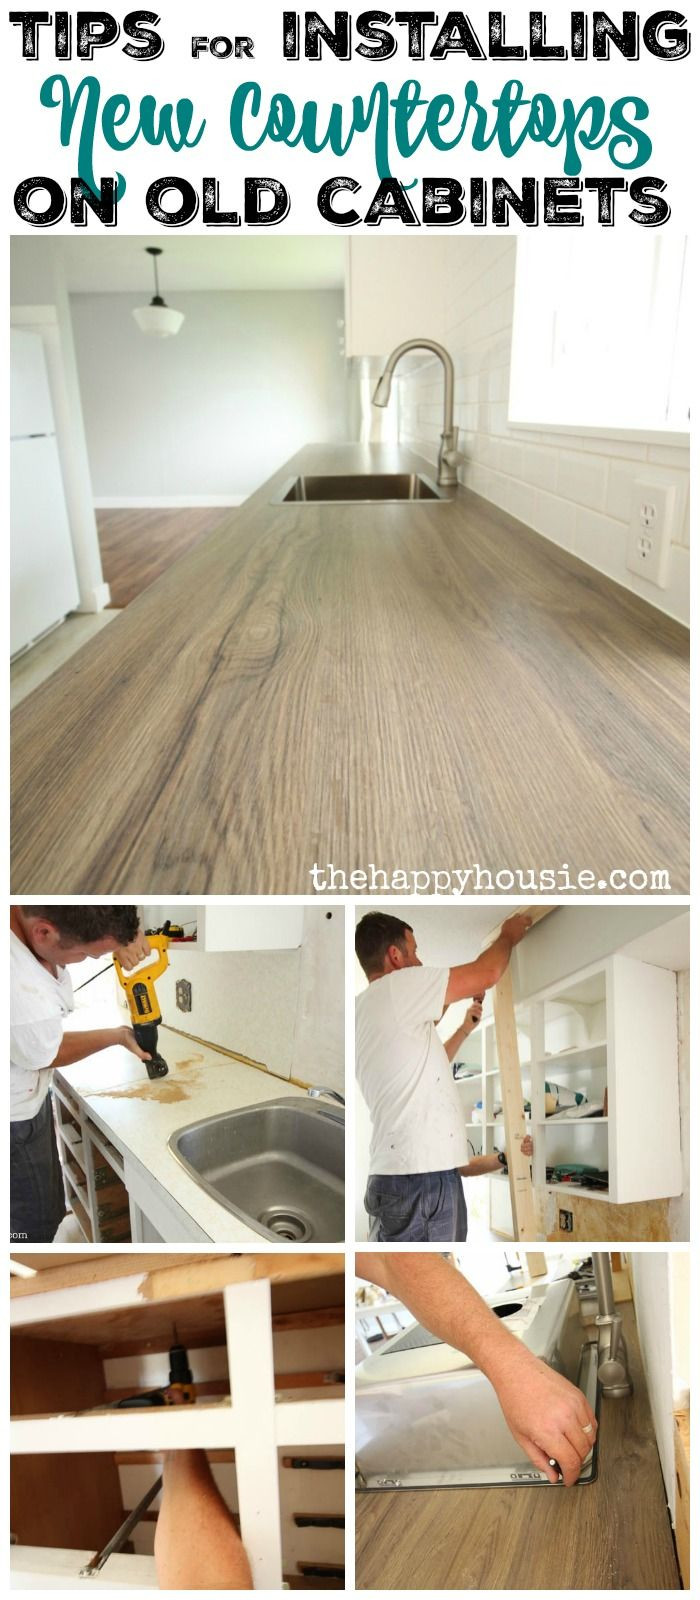 13 Spectacular Hardwood Flooring Countertops Diy 2024 free download hardwood flooring countertops diy of how to install new countertops on old cabinets diy pinterest throughout if you want to refresh old cabinets with new countertops then you should read the